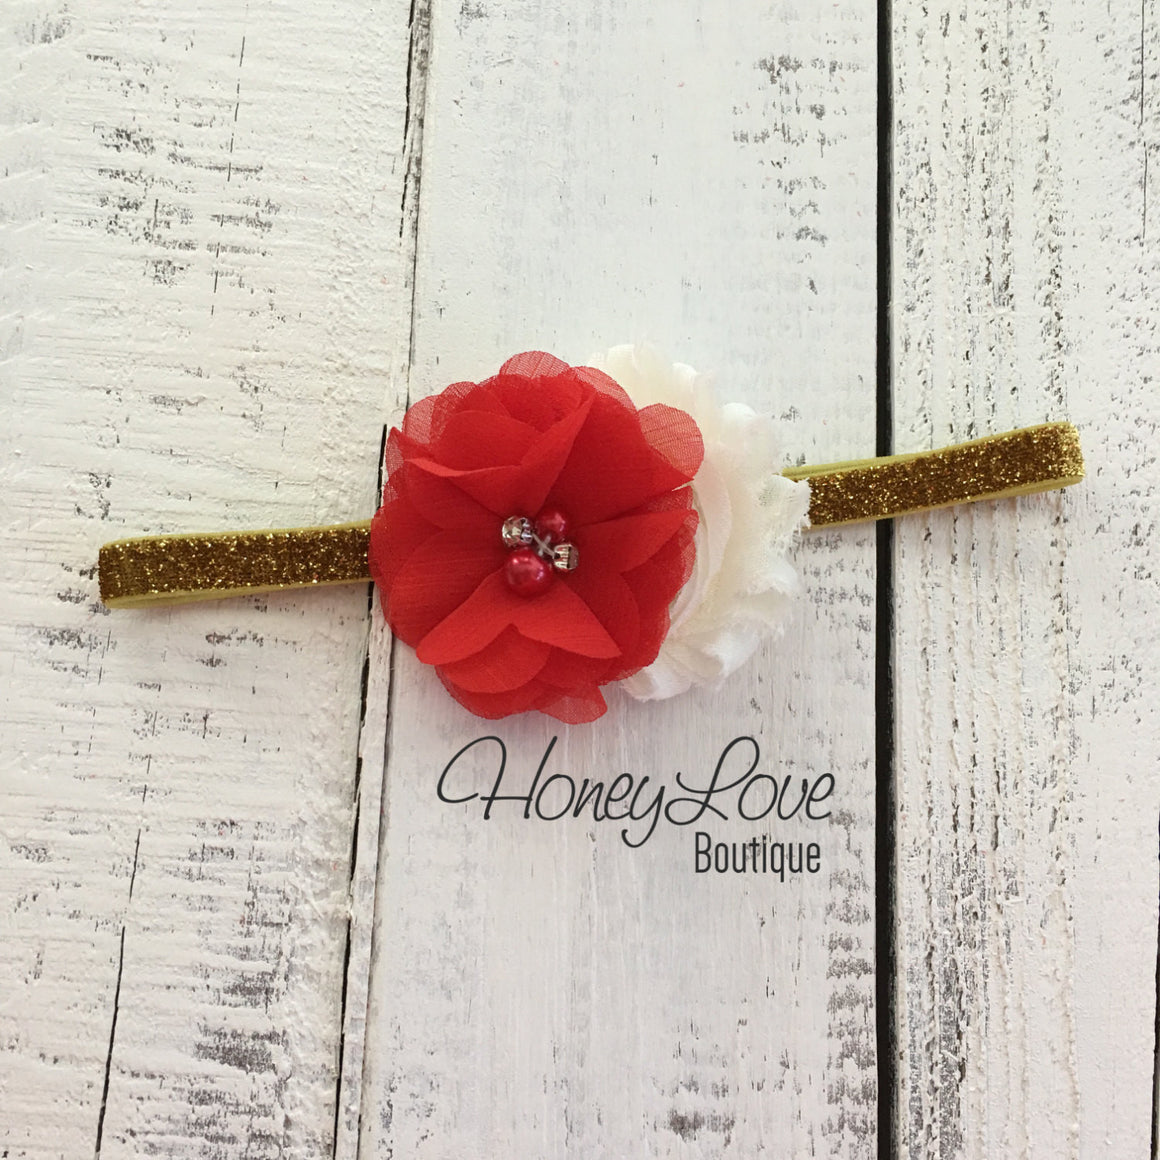 Red/Ivory Embellished tutu skirt bloomers and Gold/Silver glitter headband - HoneyLoveBoutique